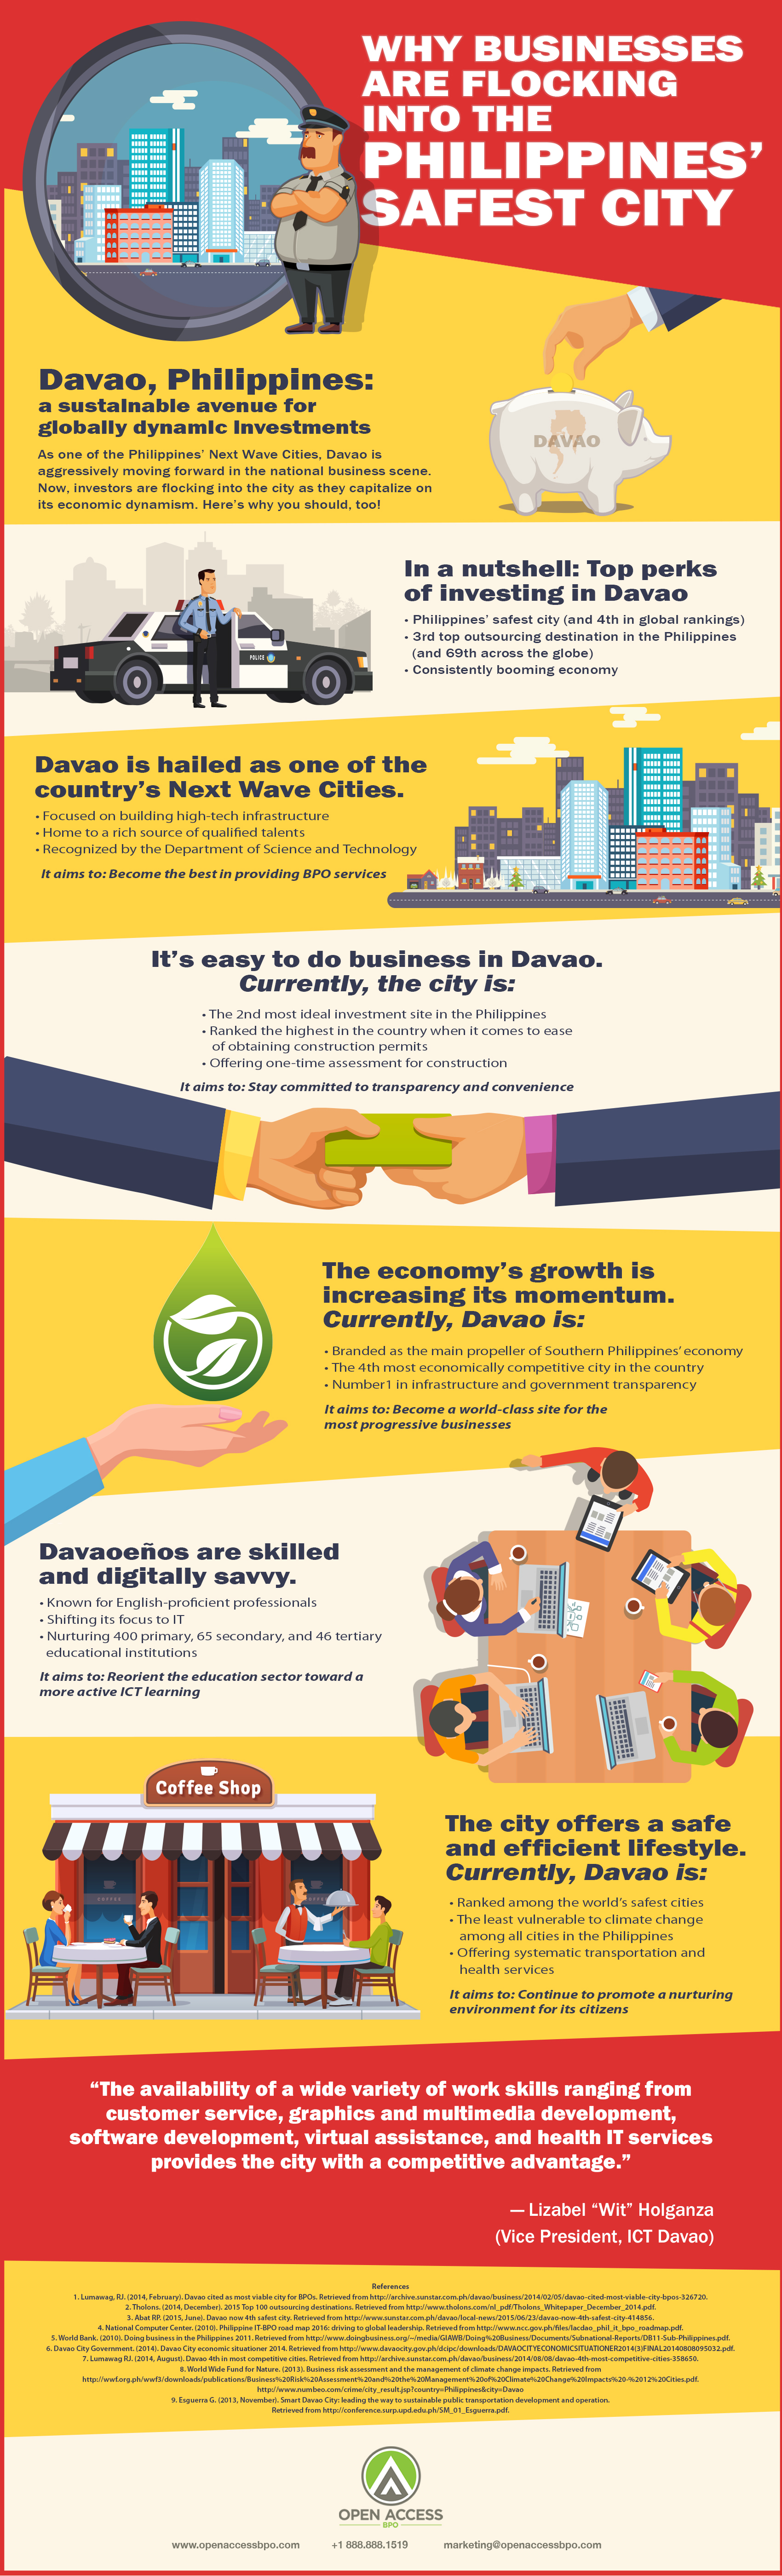 [Infographic] Meet the next Philippine outsourcing giant: Davao City